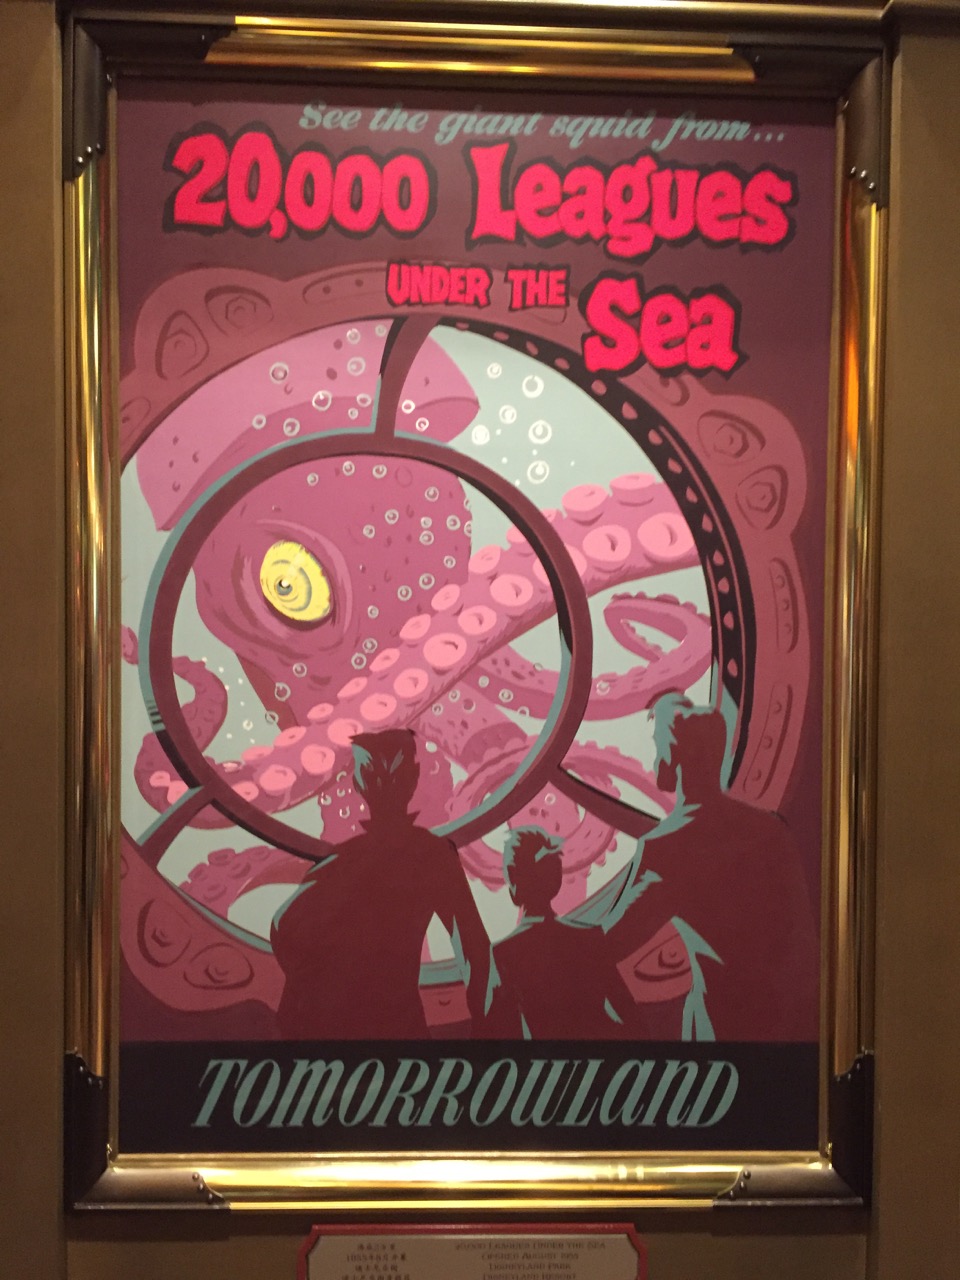 20,000 Leagues Under the Sea at Disneyland? It's a great poster, but I'm not sure what it's purpose is. Photo by J. Jeff Kober.